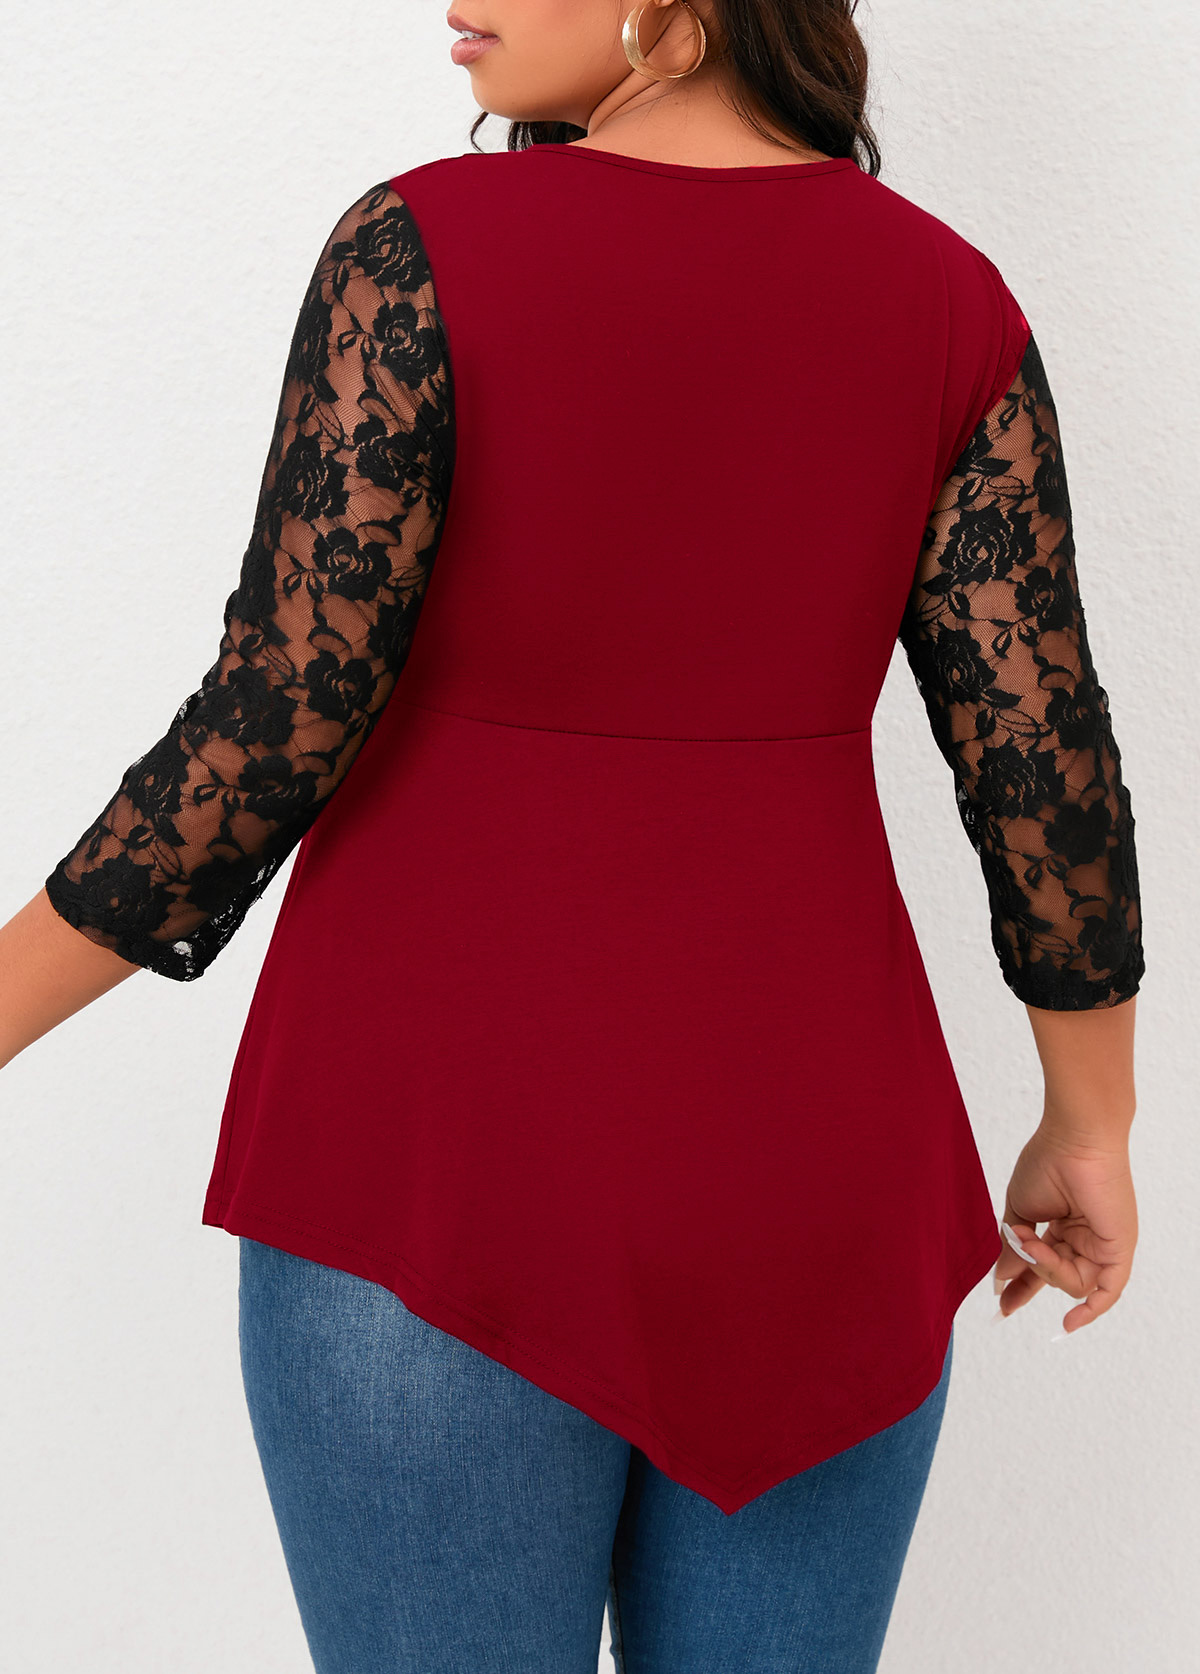 Wine Red Plus Size Lace T Shirt